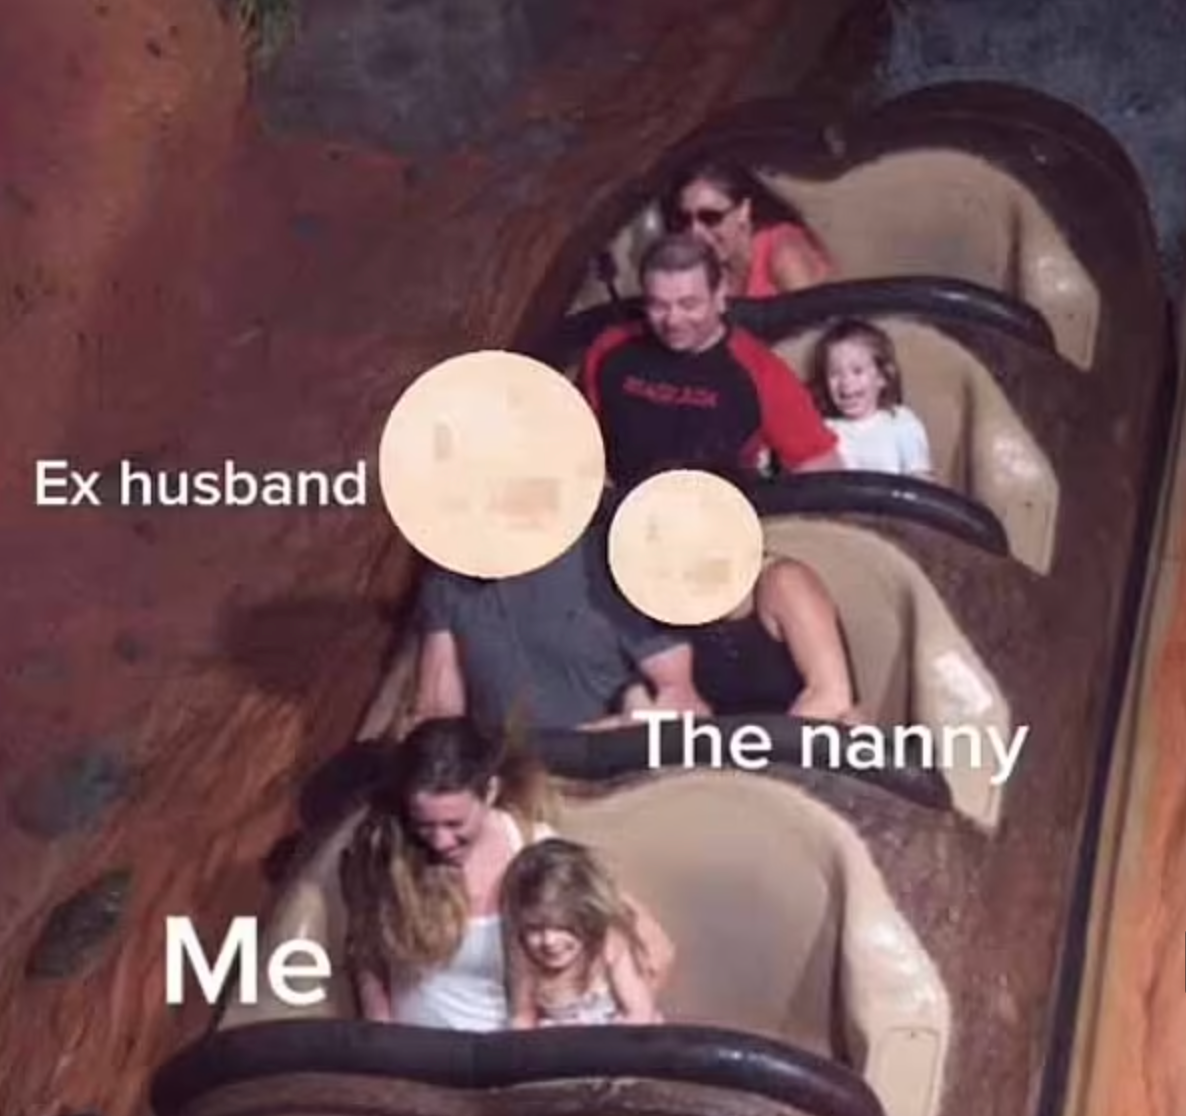 Woman Discovers Husband's Affair With Nanny Thanks To Disney Ride Photo